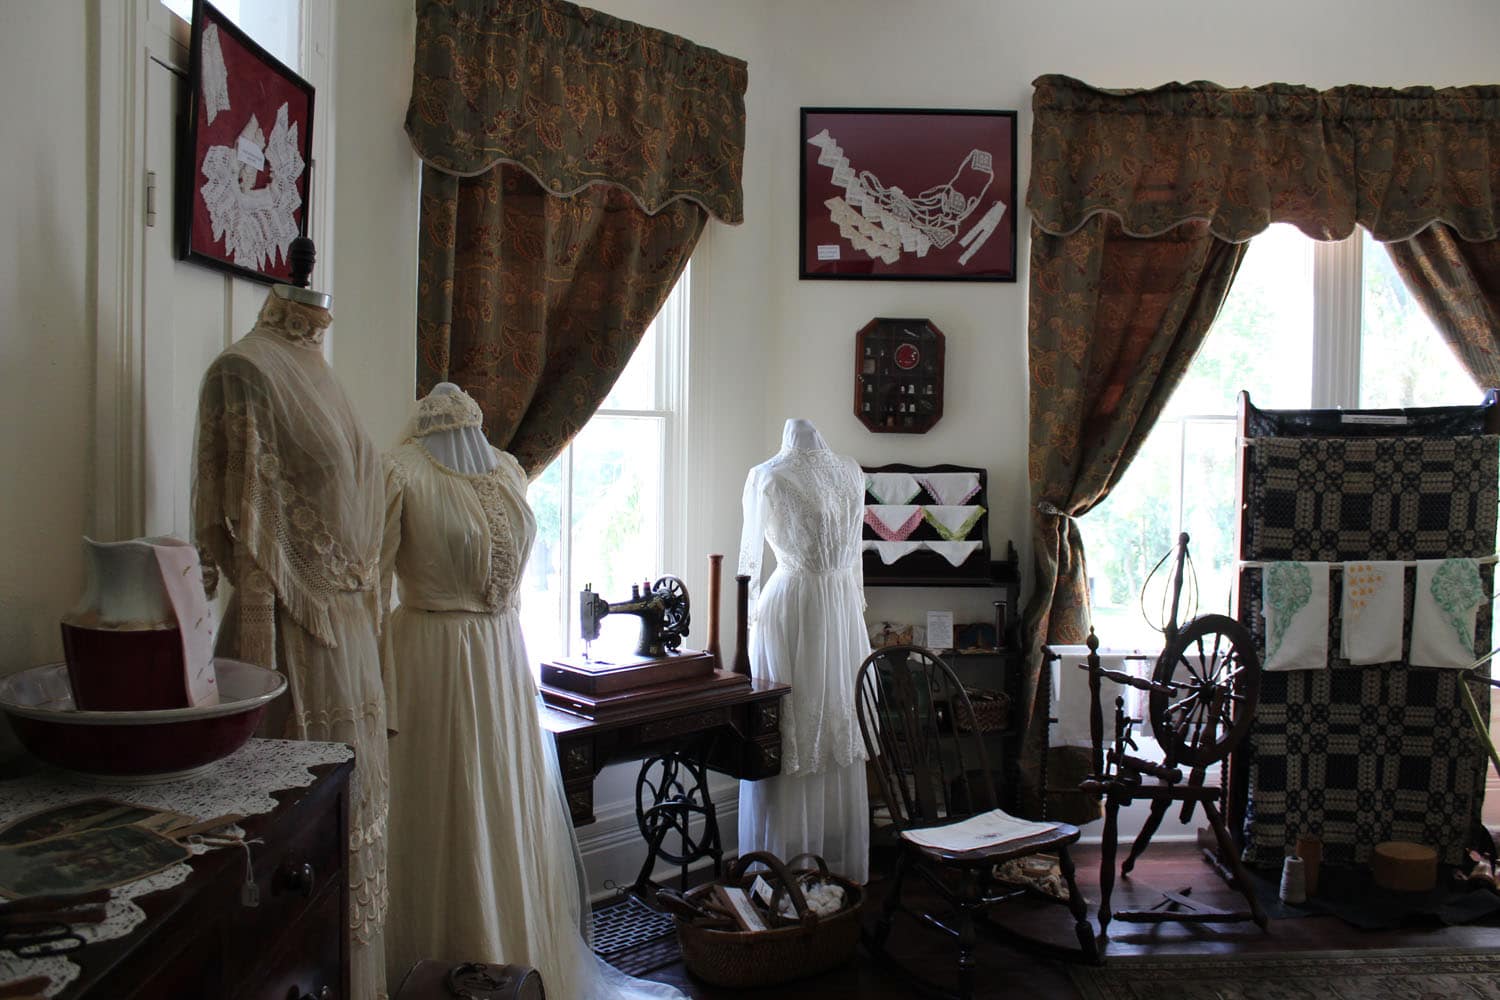 The textile Room